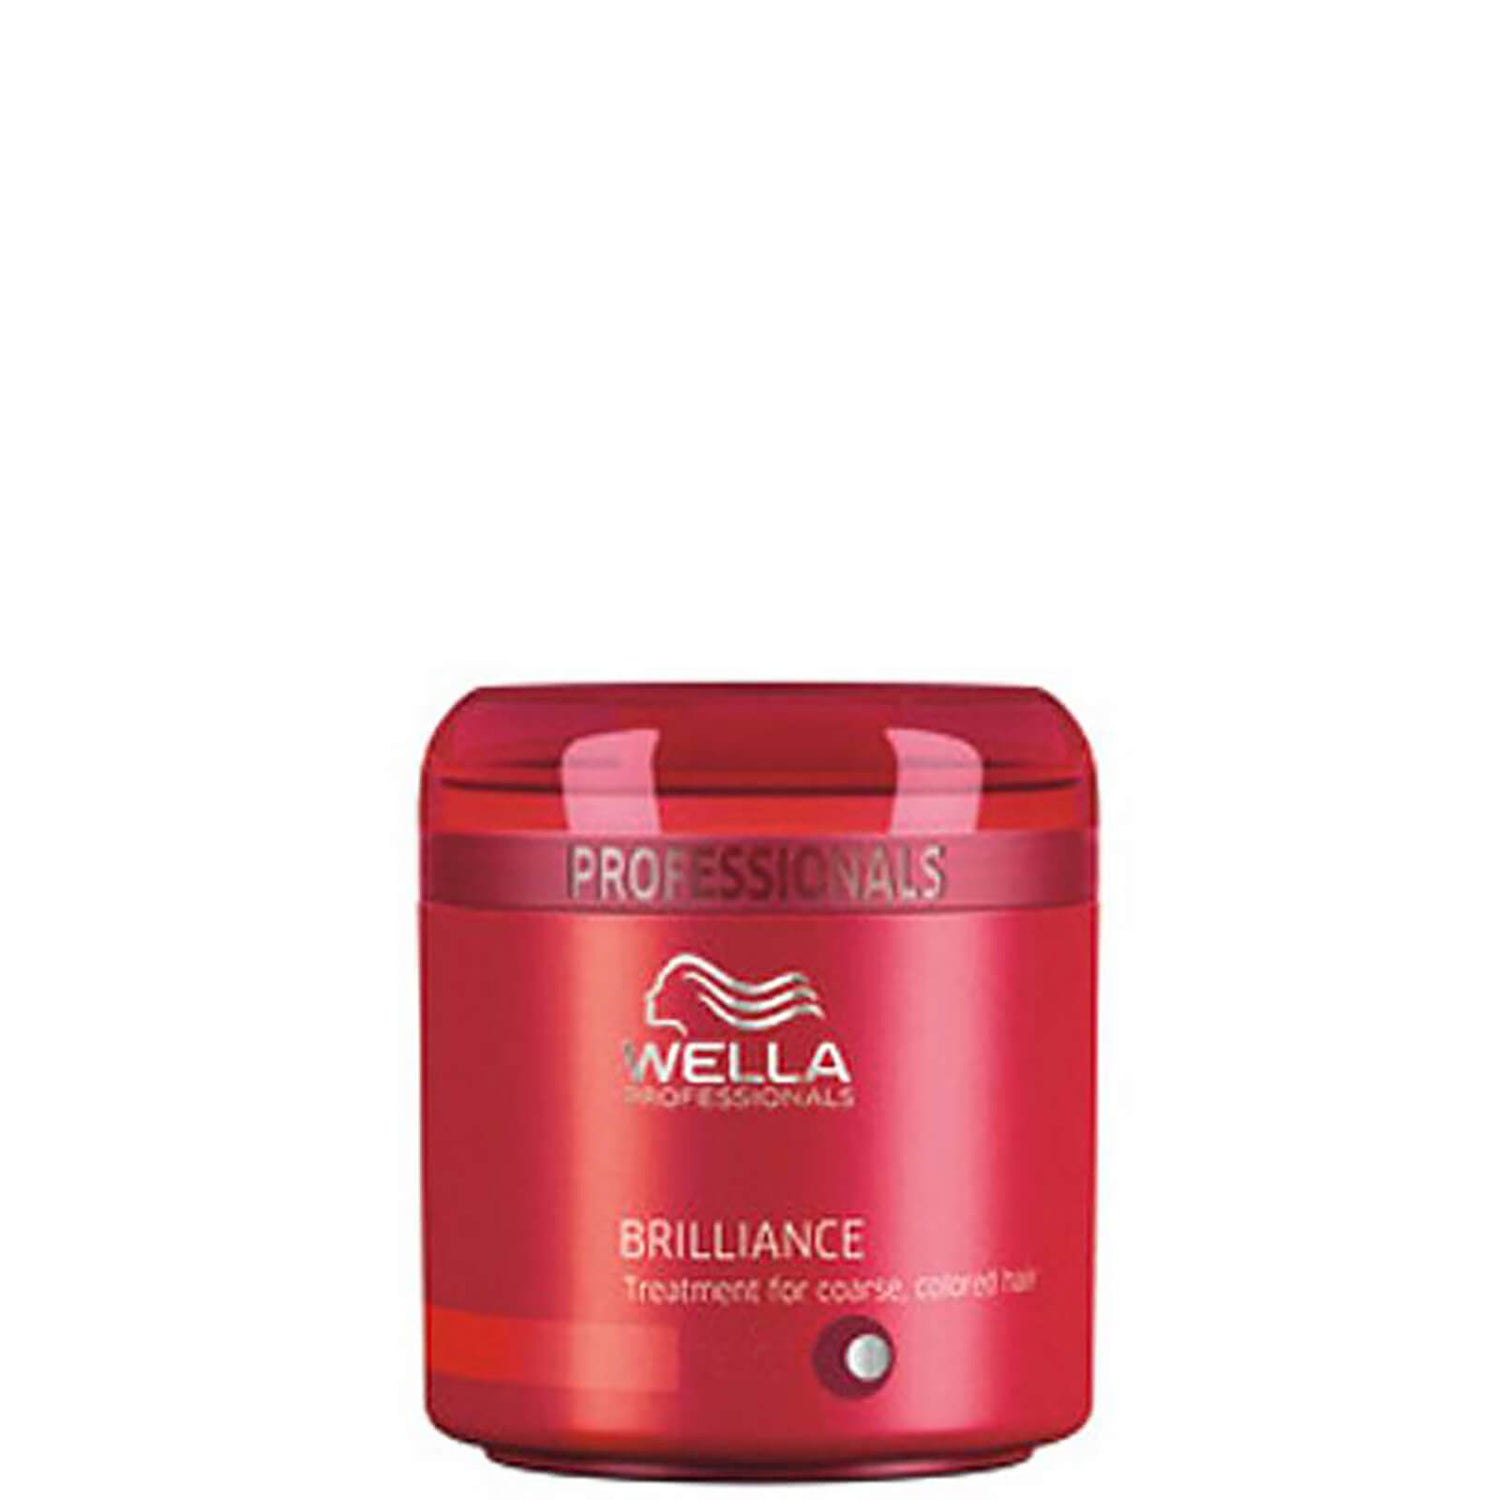 Wella Professionals Brilliance Treatment For Fine To Normal, Coloured Hair (150 ml)